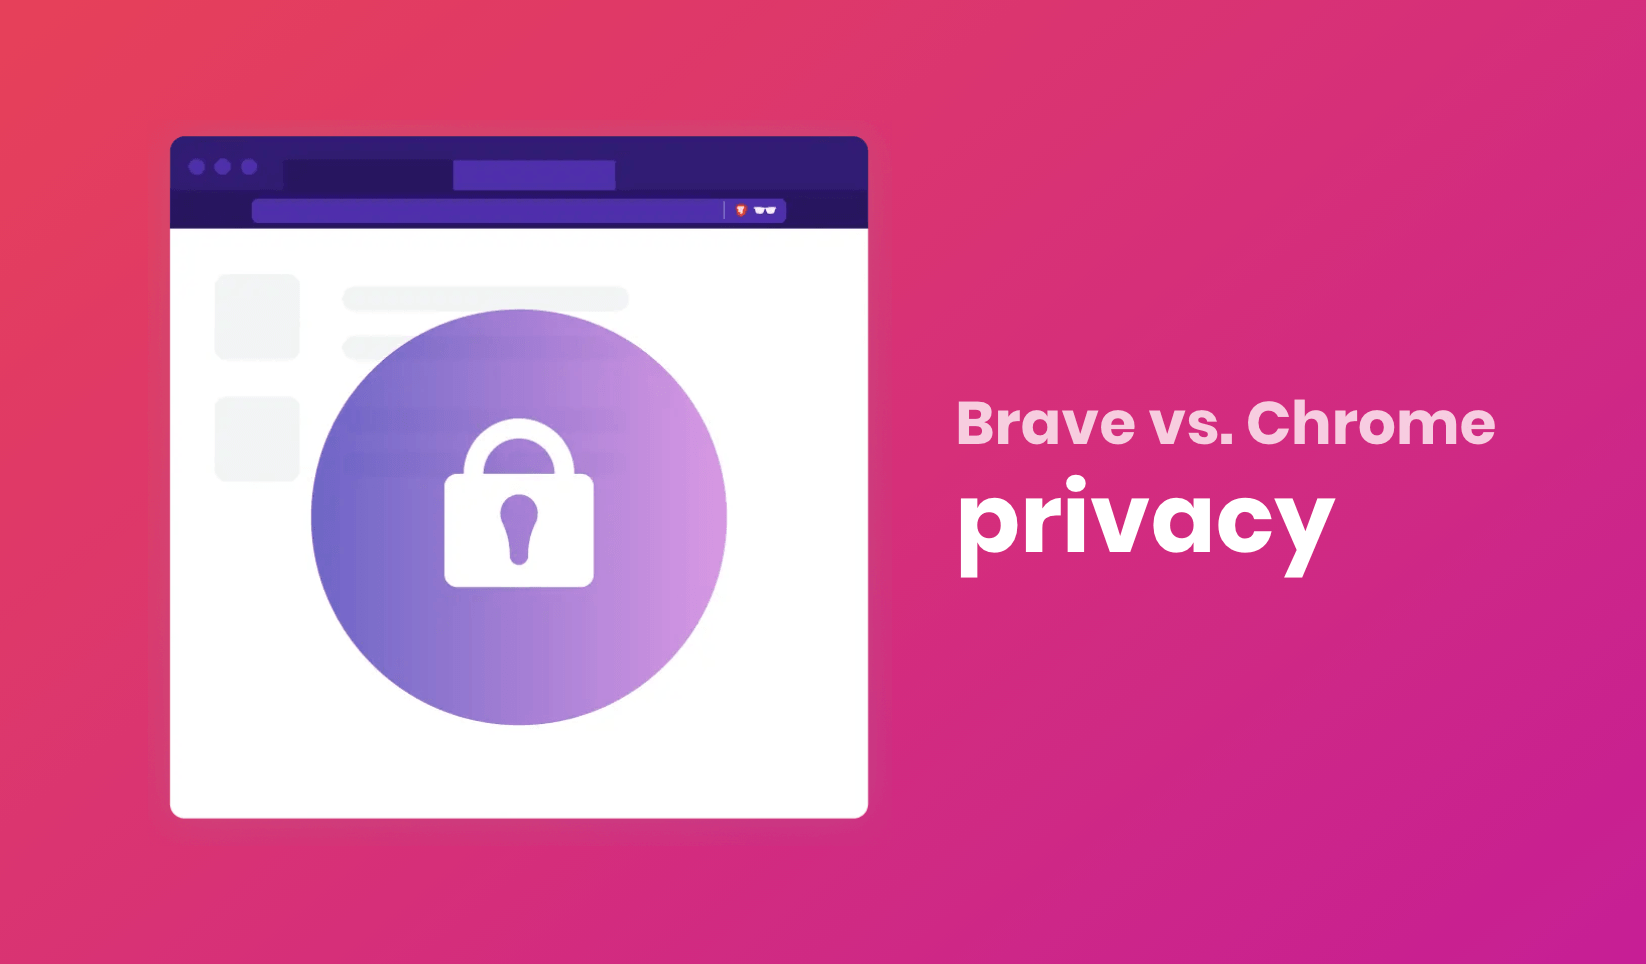 Is Brave bad for privacy?